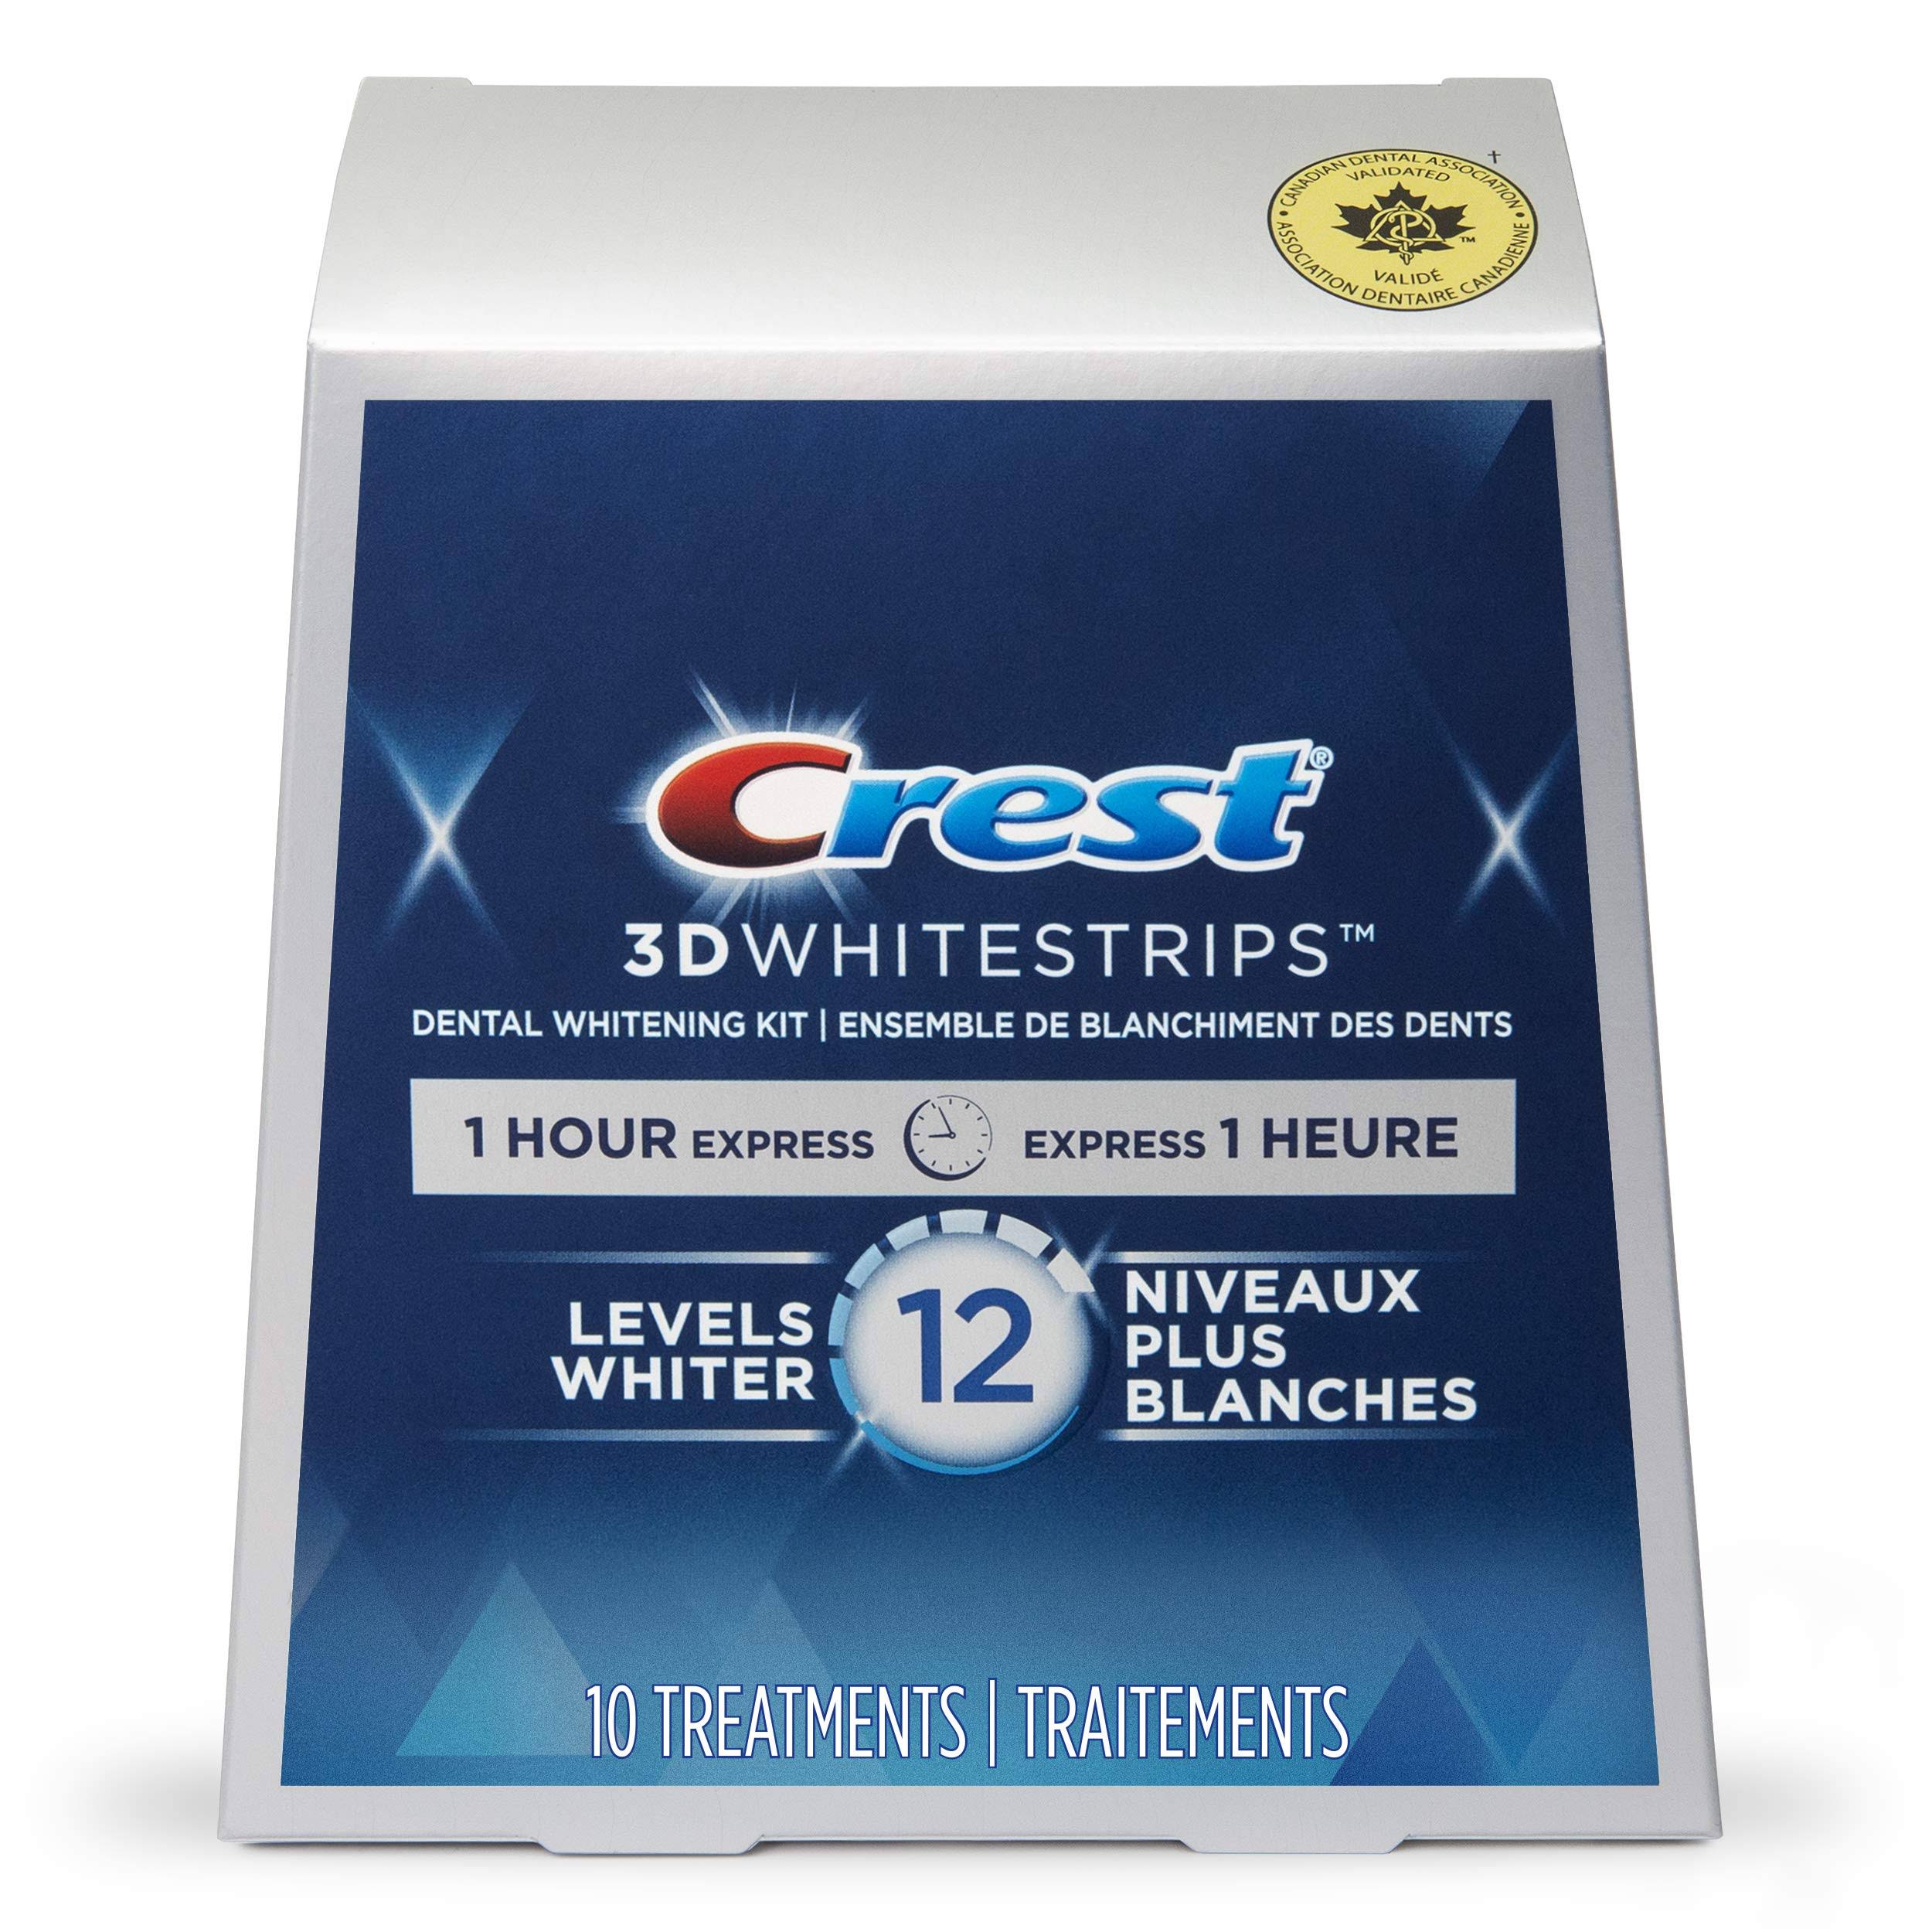 Crest 3Dwhitrstrips 1-Hour Express At-Home Teeth Whitening Kit